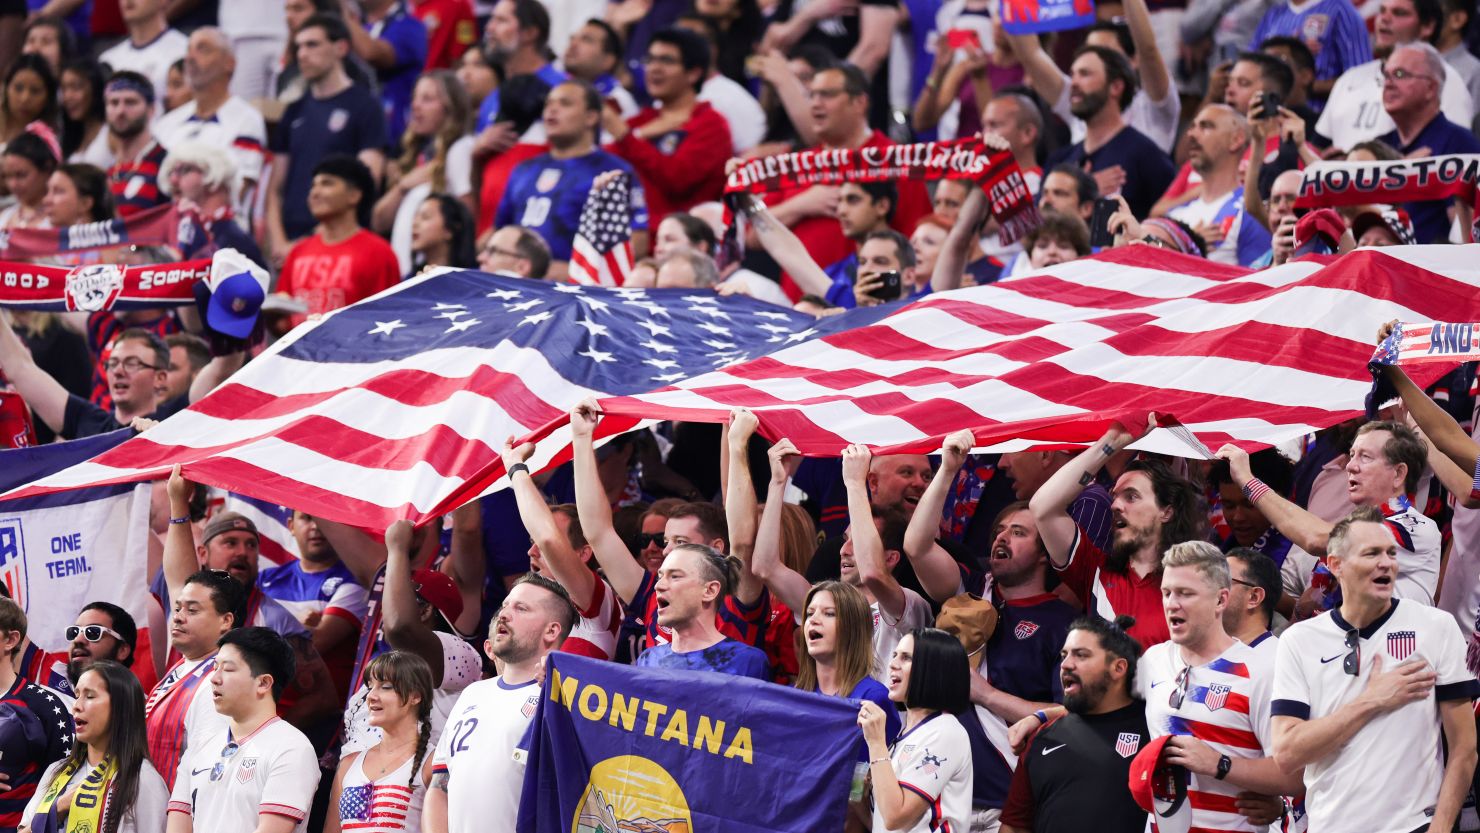 Fans of the United States cheer at Mercedes-Benz Stadium on June 27 in Atlanta. More than 59,000 people showed up to watch the US play Panama live.